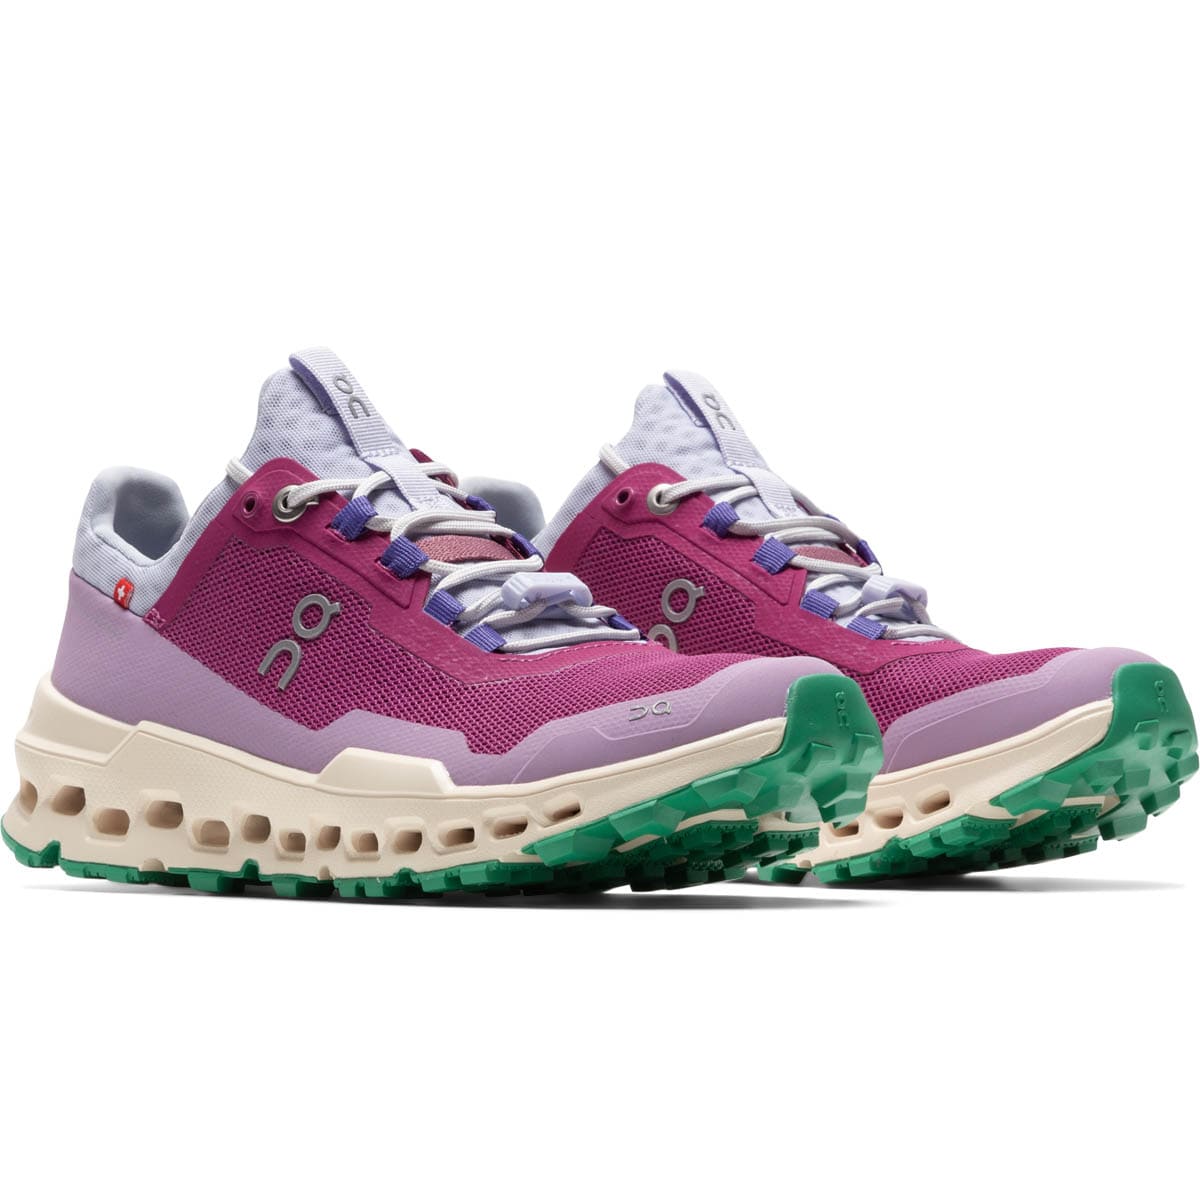 On WOMEN'S CLOUDULTRA EXCLUSIVE RHUBARB/RAY